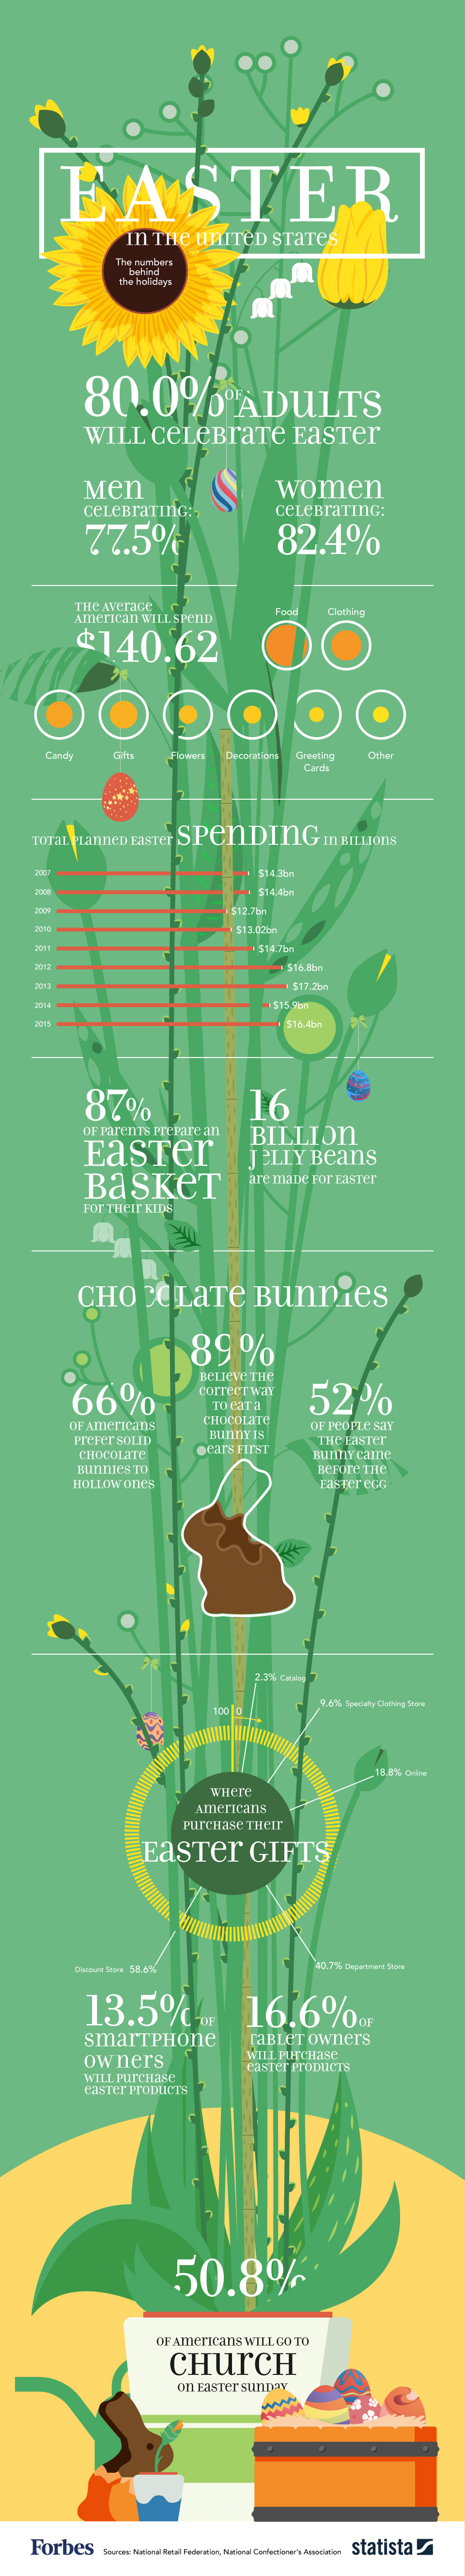 [INFOGRAPHIC] Easter: America’s Most Popular Holiday!